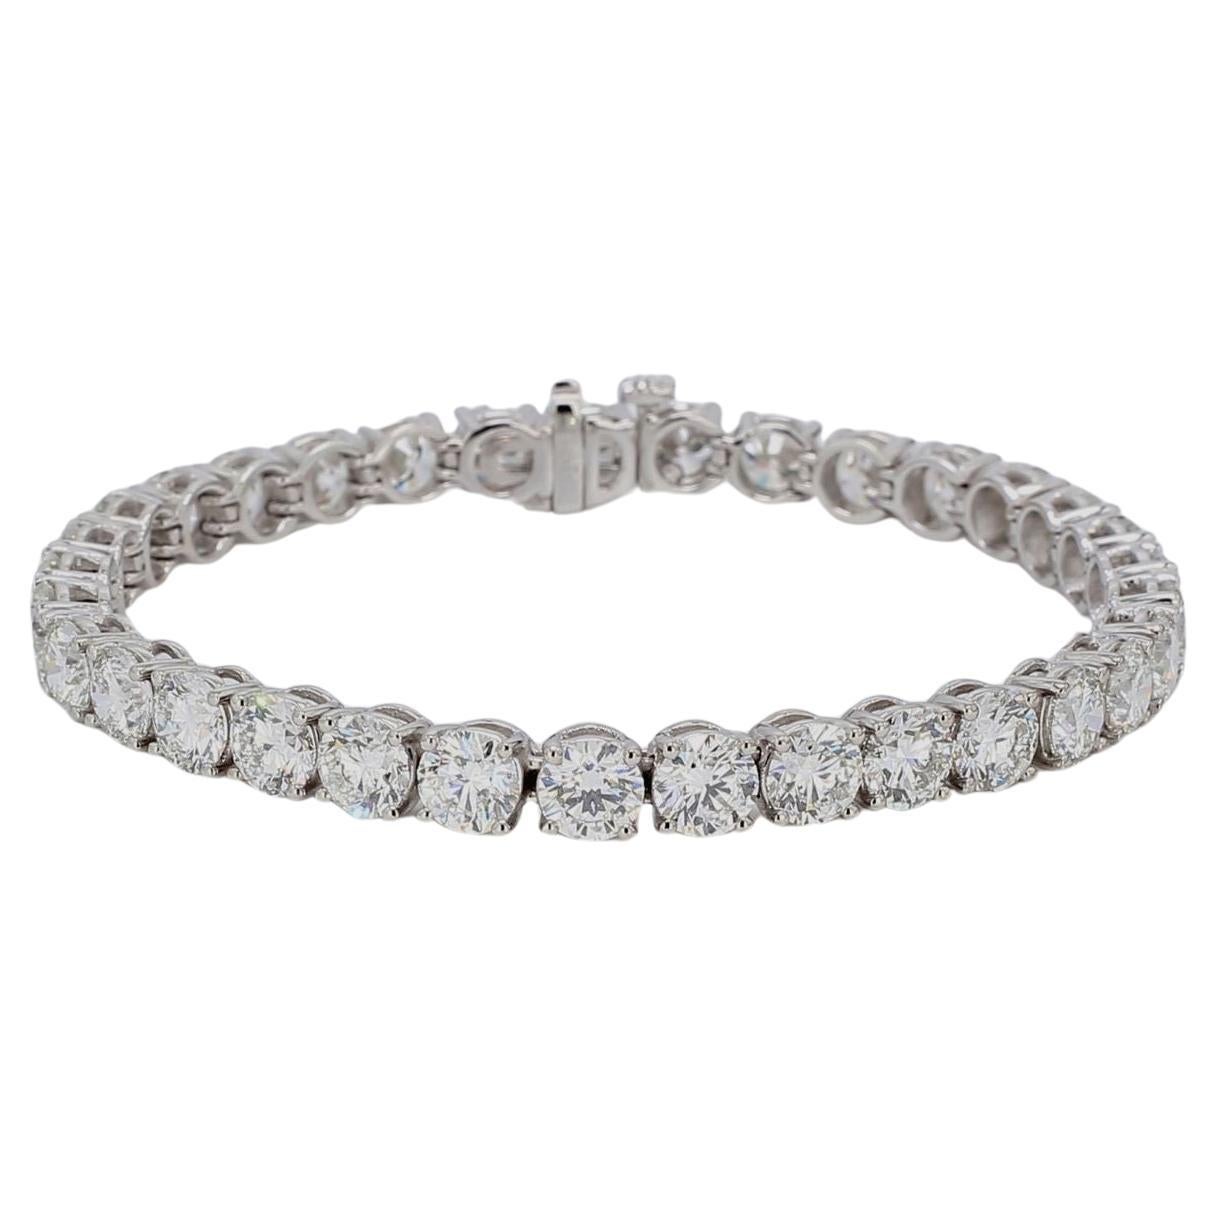 Experience the epitome of elegance and craftsmanship with this 6.75-inch tennis bracelet, masterfully crafted in platinum. 
This exquisite piece features a series of 33 round diamonds, each meticulously set in a secure 4-prong setting. These